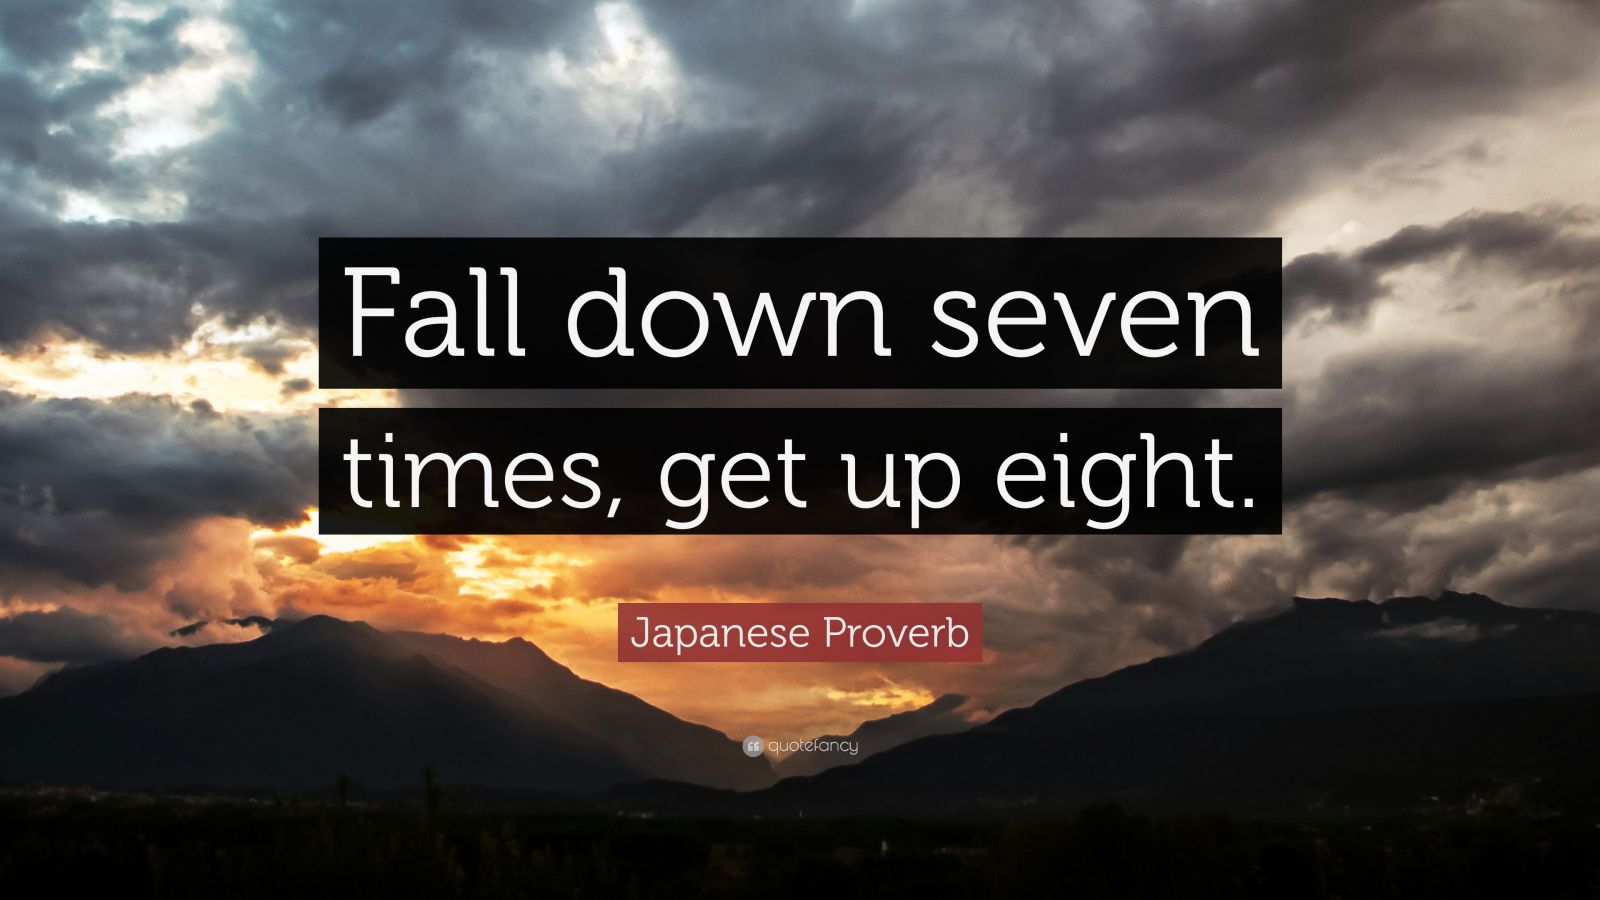 Japanese Proverb Quote: “Fall down seven times, get up eight.” (34